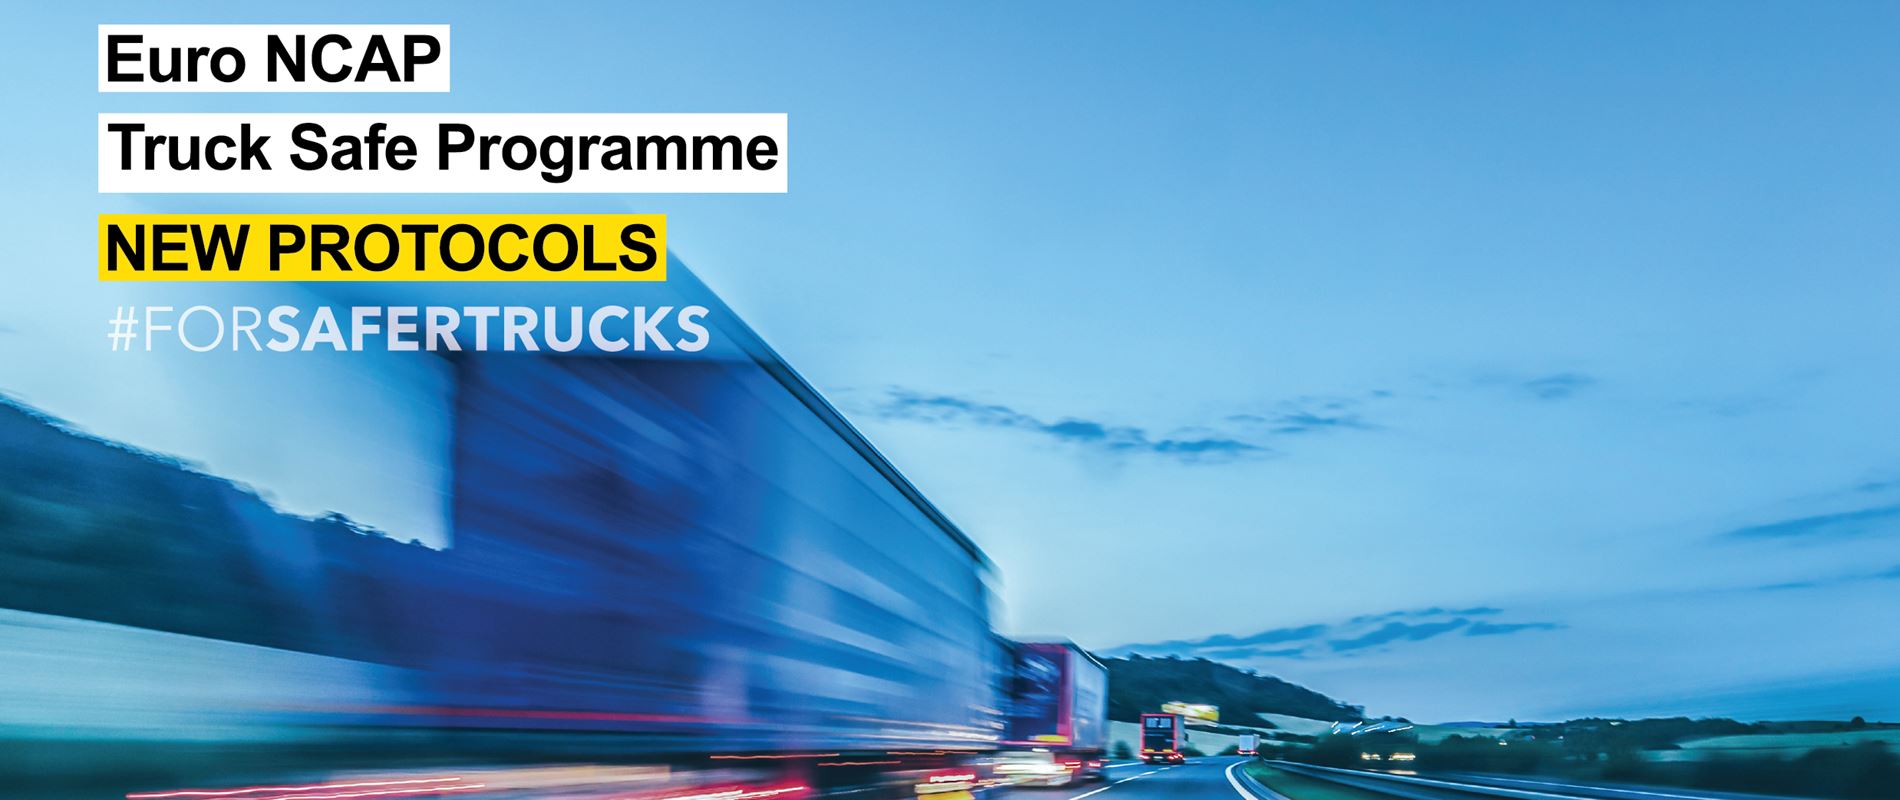 today--the-first-test-protocols-are-made-available-for-the-truck-safe-programme------